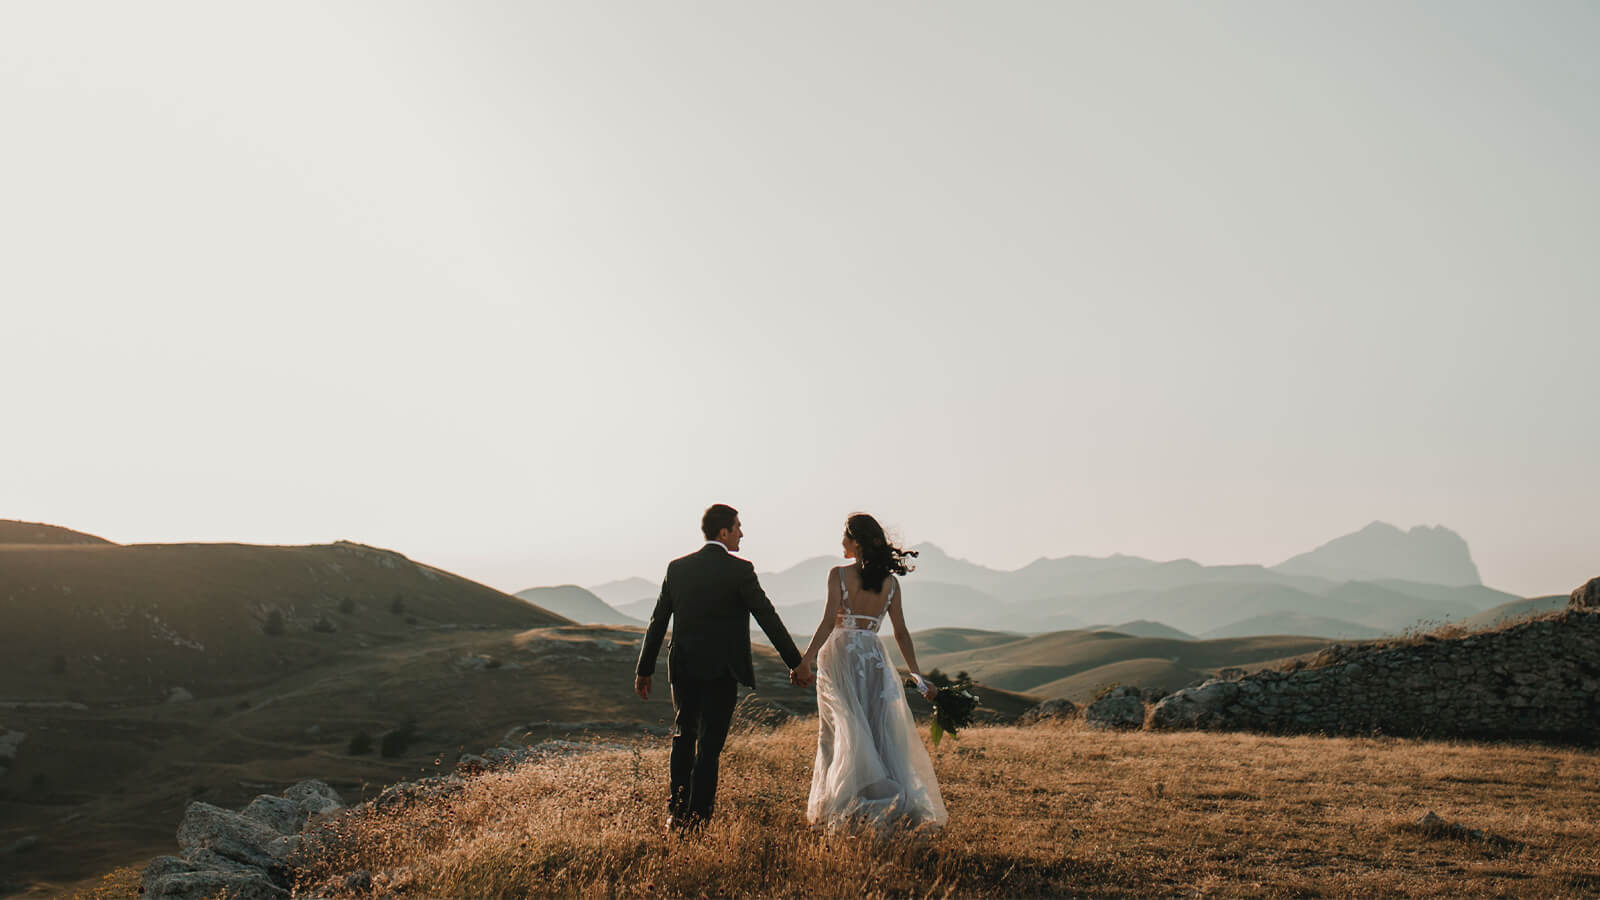 How much does a wedding photographer cost? Learn more about hire prices as well as other key things to consider for your big day.